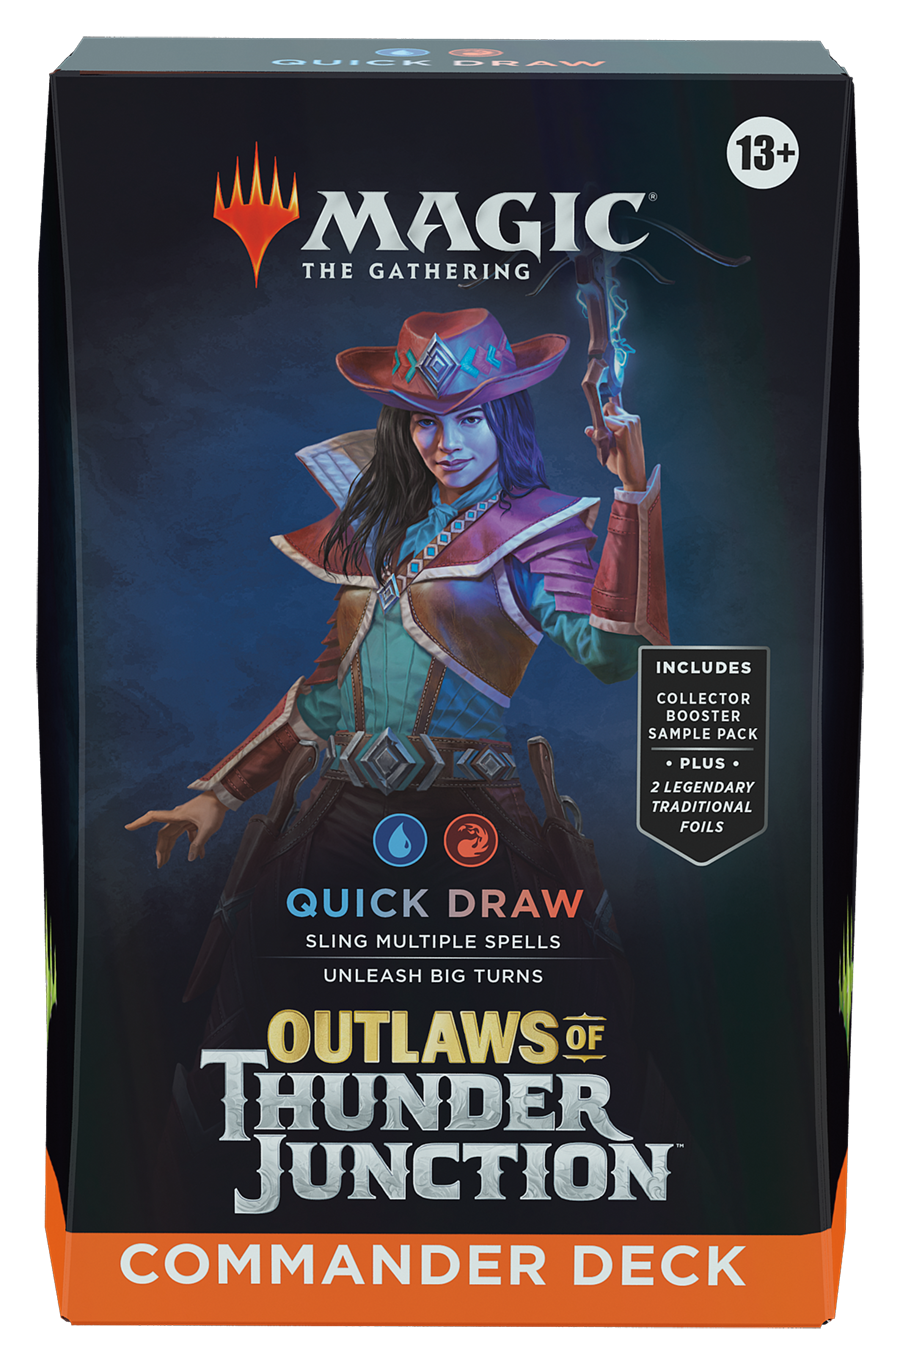 QUICK DRAW - OUTLAWS OF THUNDER JUNCTION COMMANDER DECK